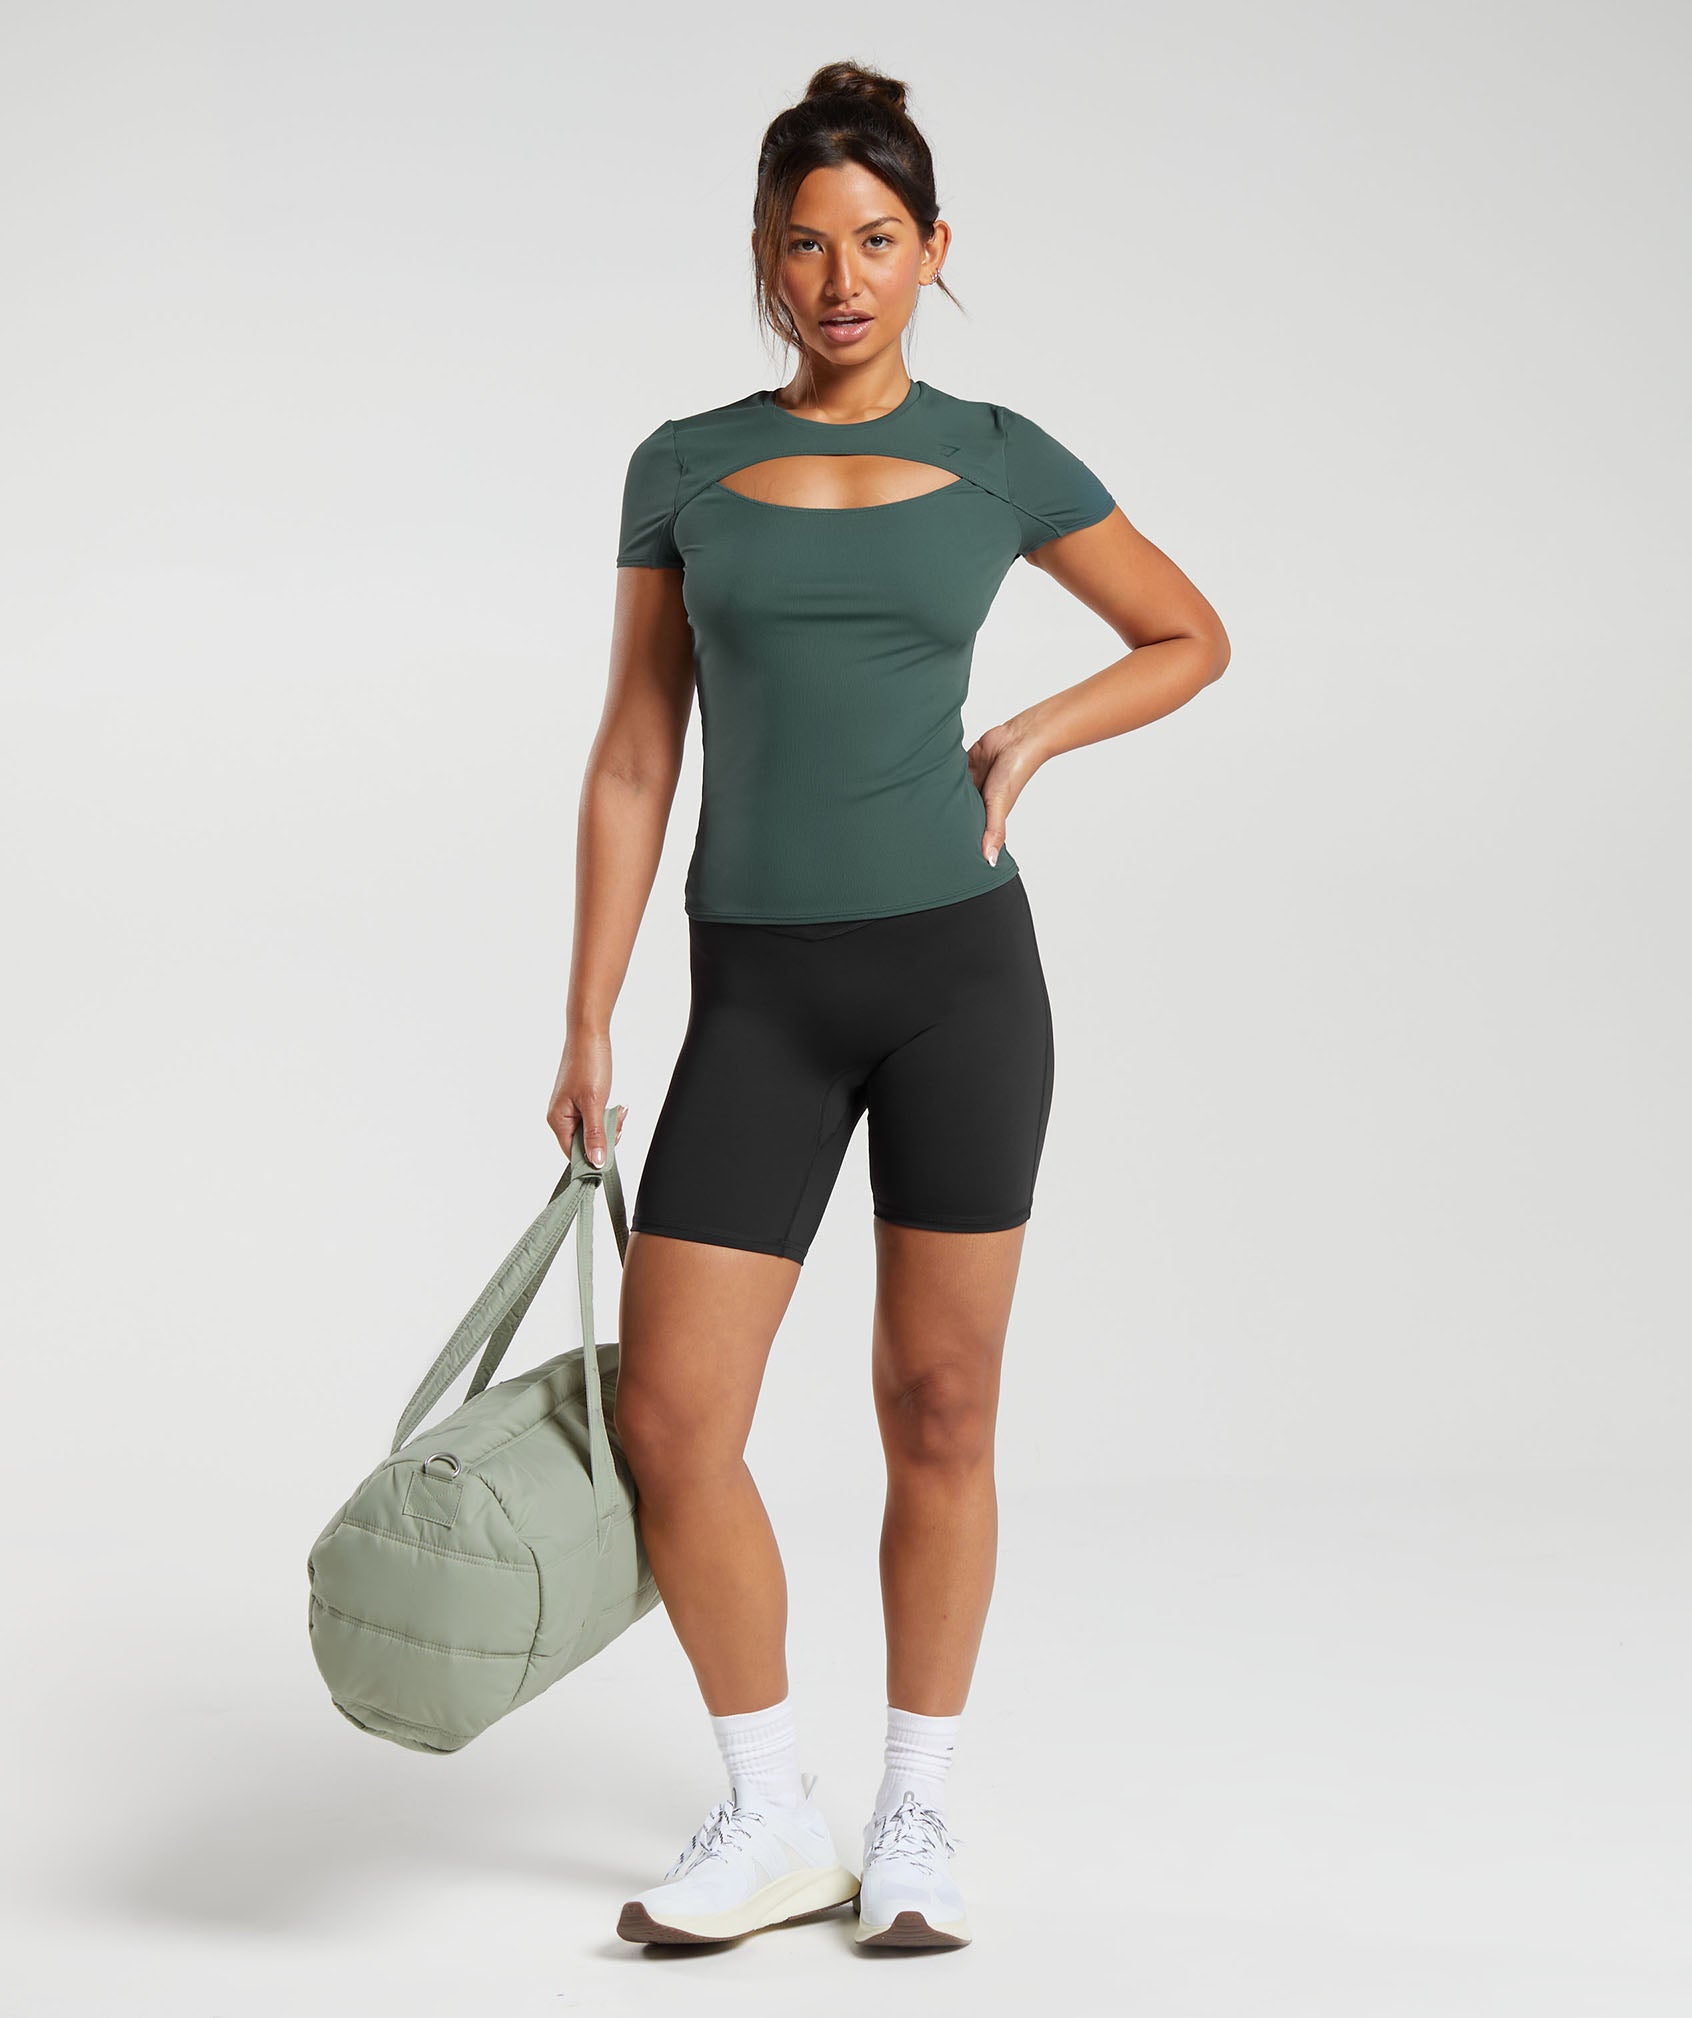 Elevate Top in Fog Green - view 4